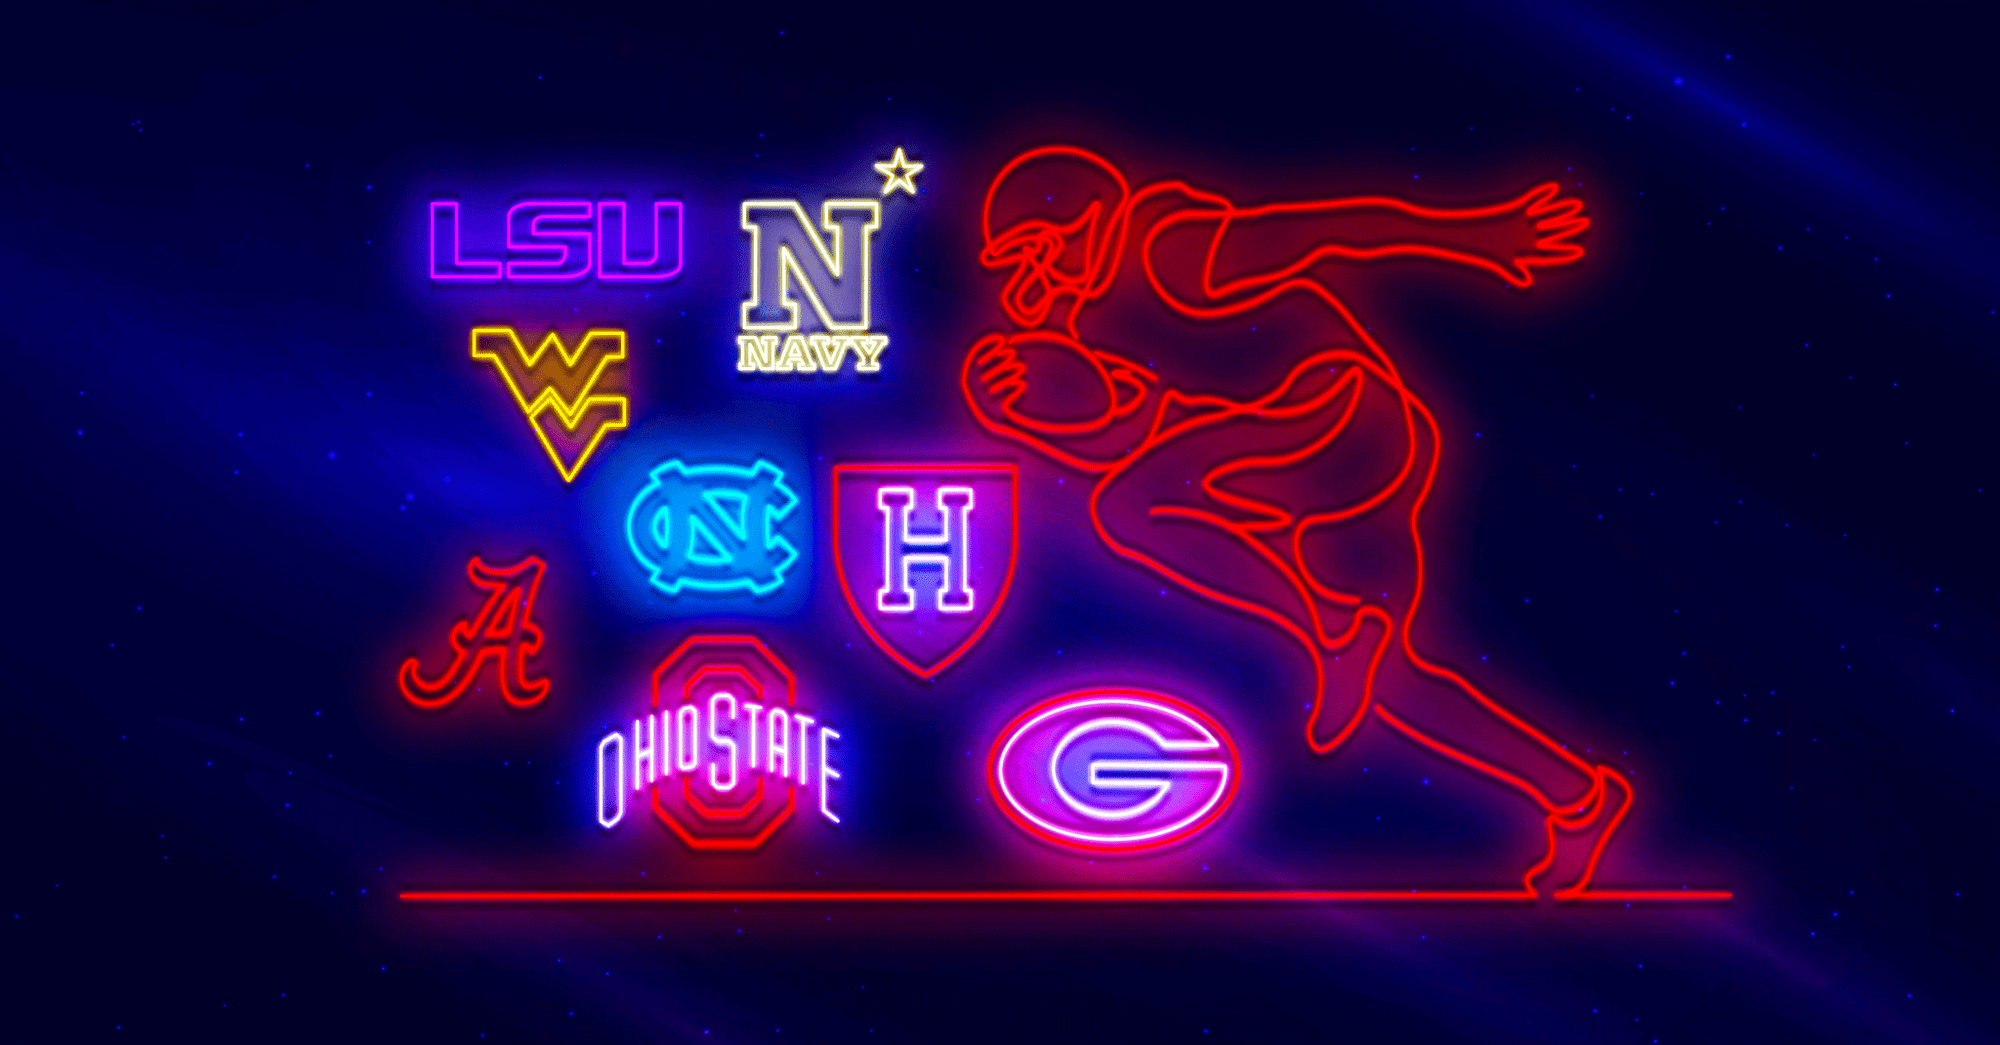 College Football Neon Signs. Just in time for the season.